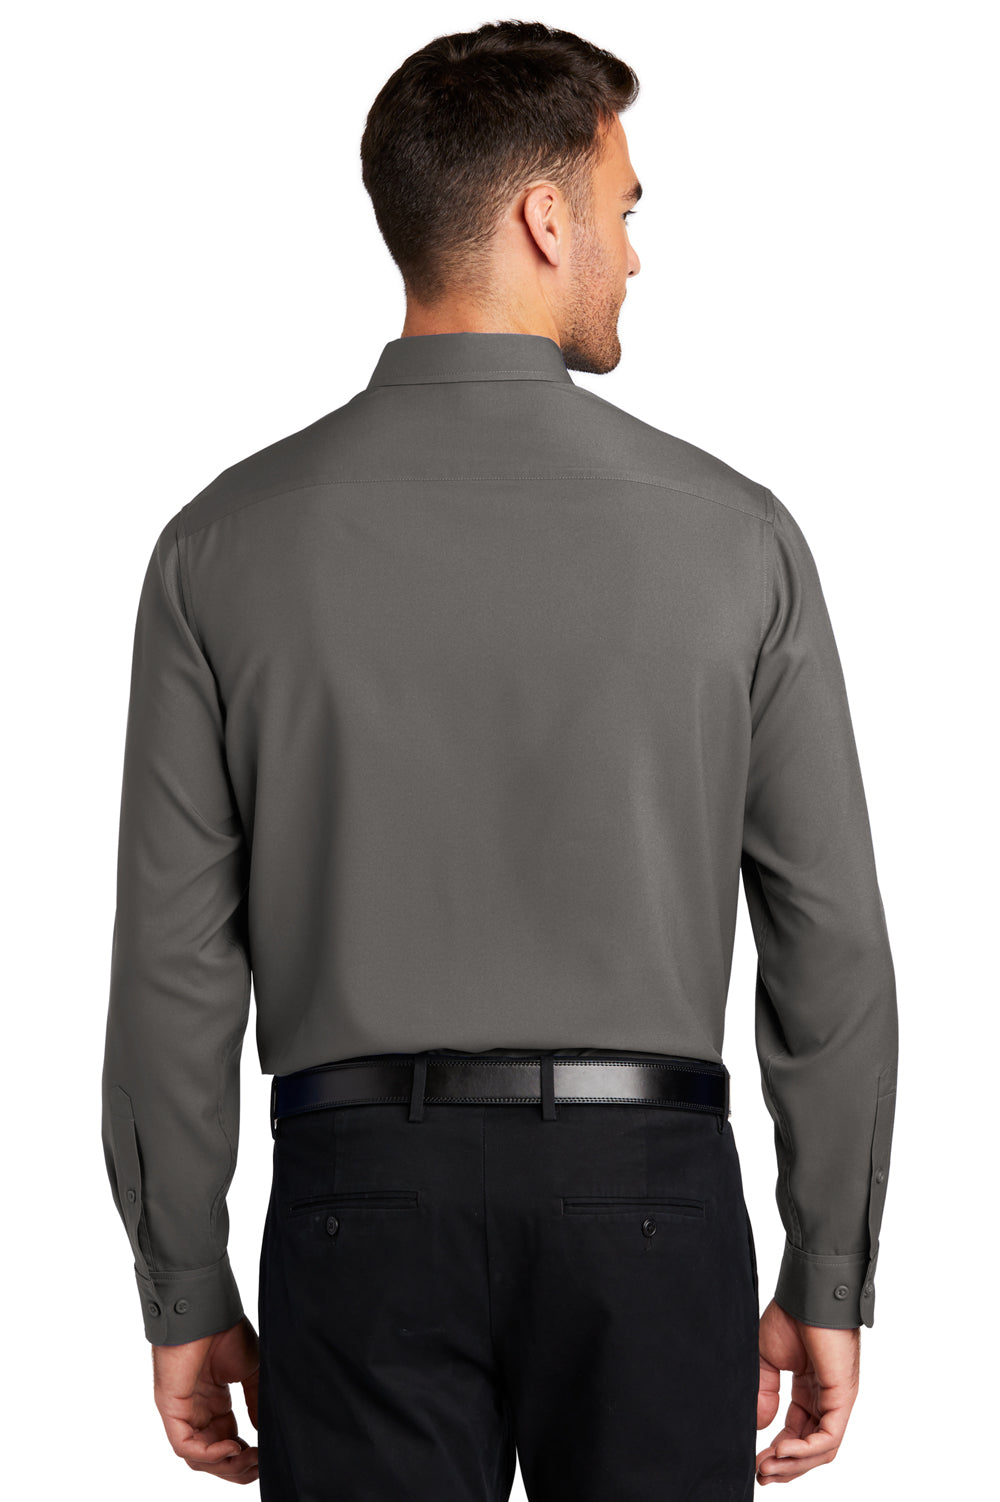 Port Authority Mens Performance Long Sleeve Button Down Shirt w/ Pocket Graphite Grey Side